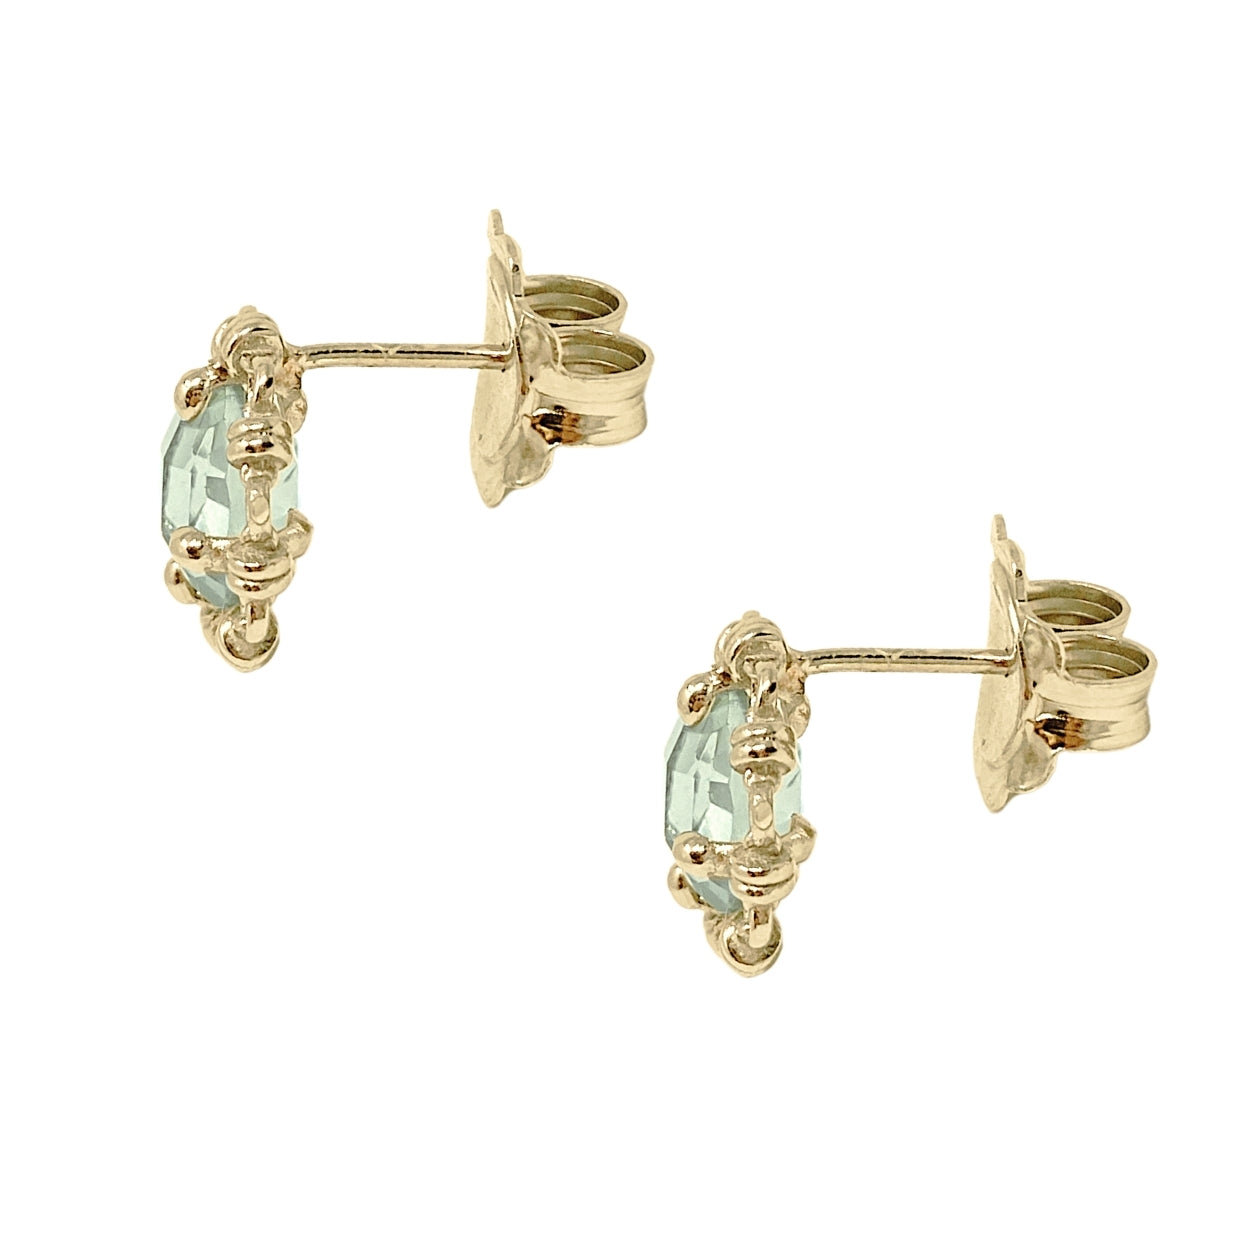 Mini Filary Stud Earrings in Gold with Prasiolite